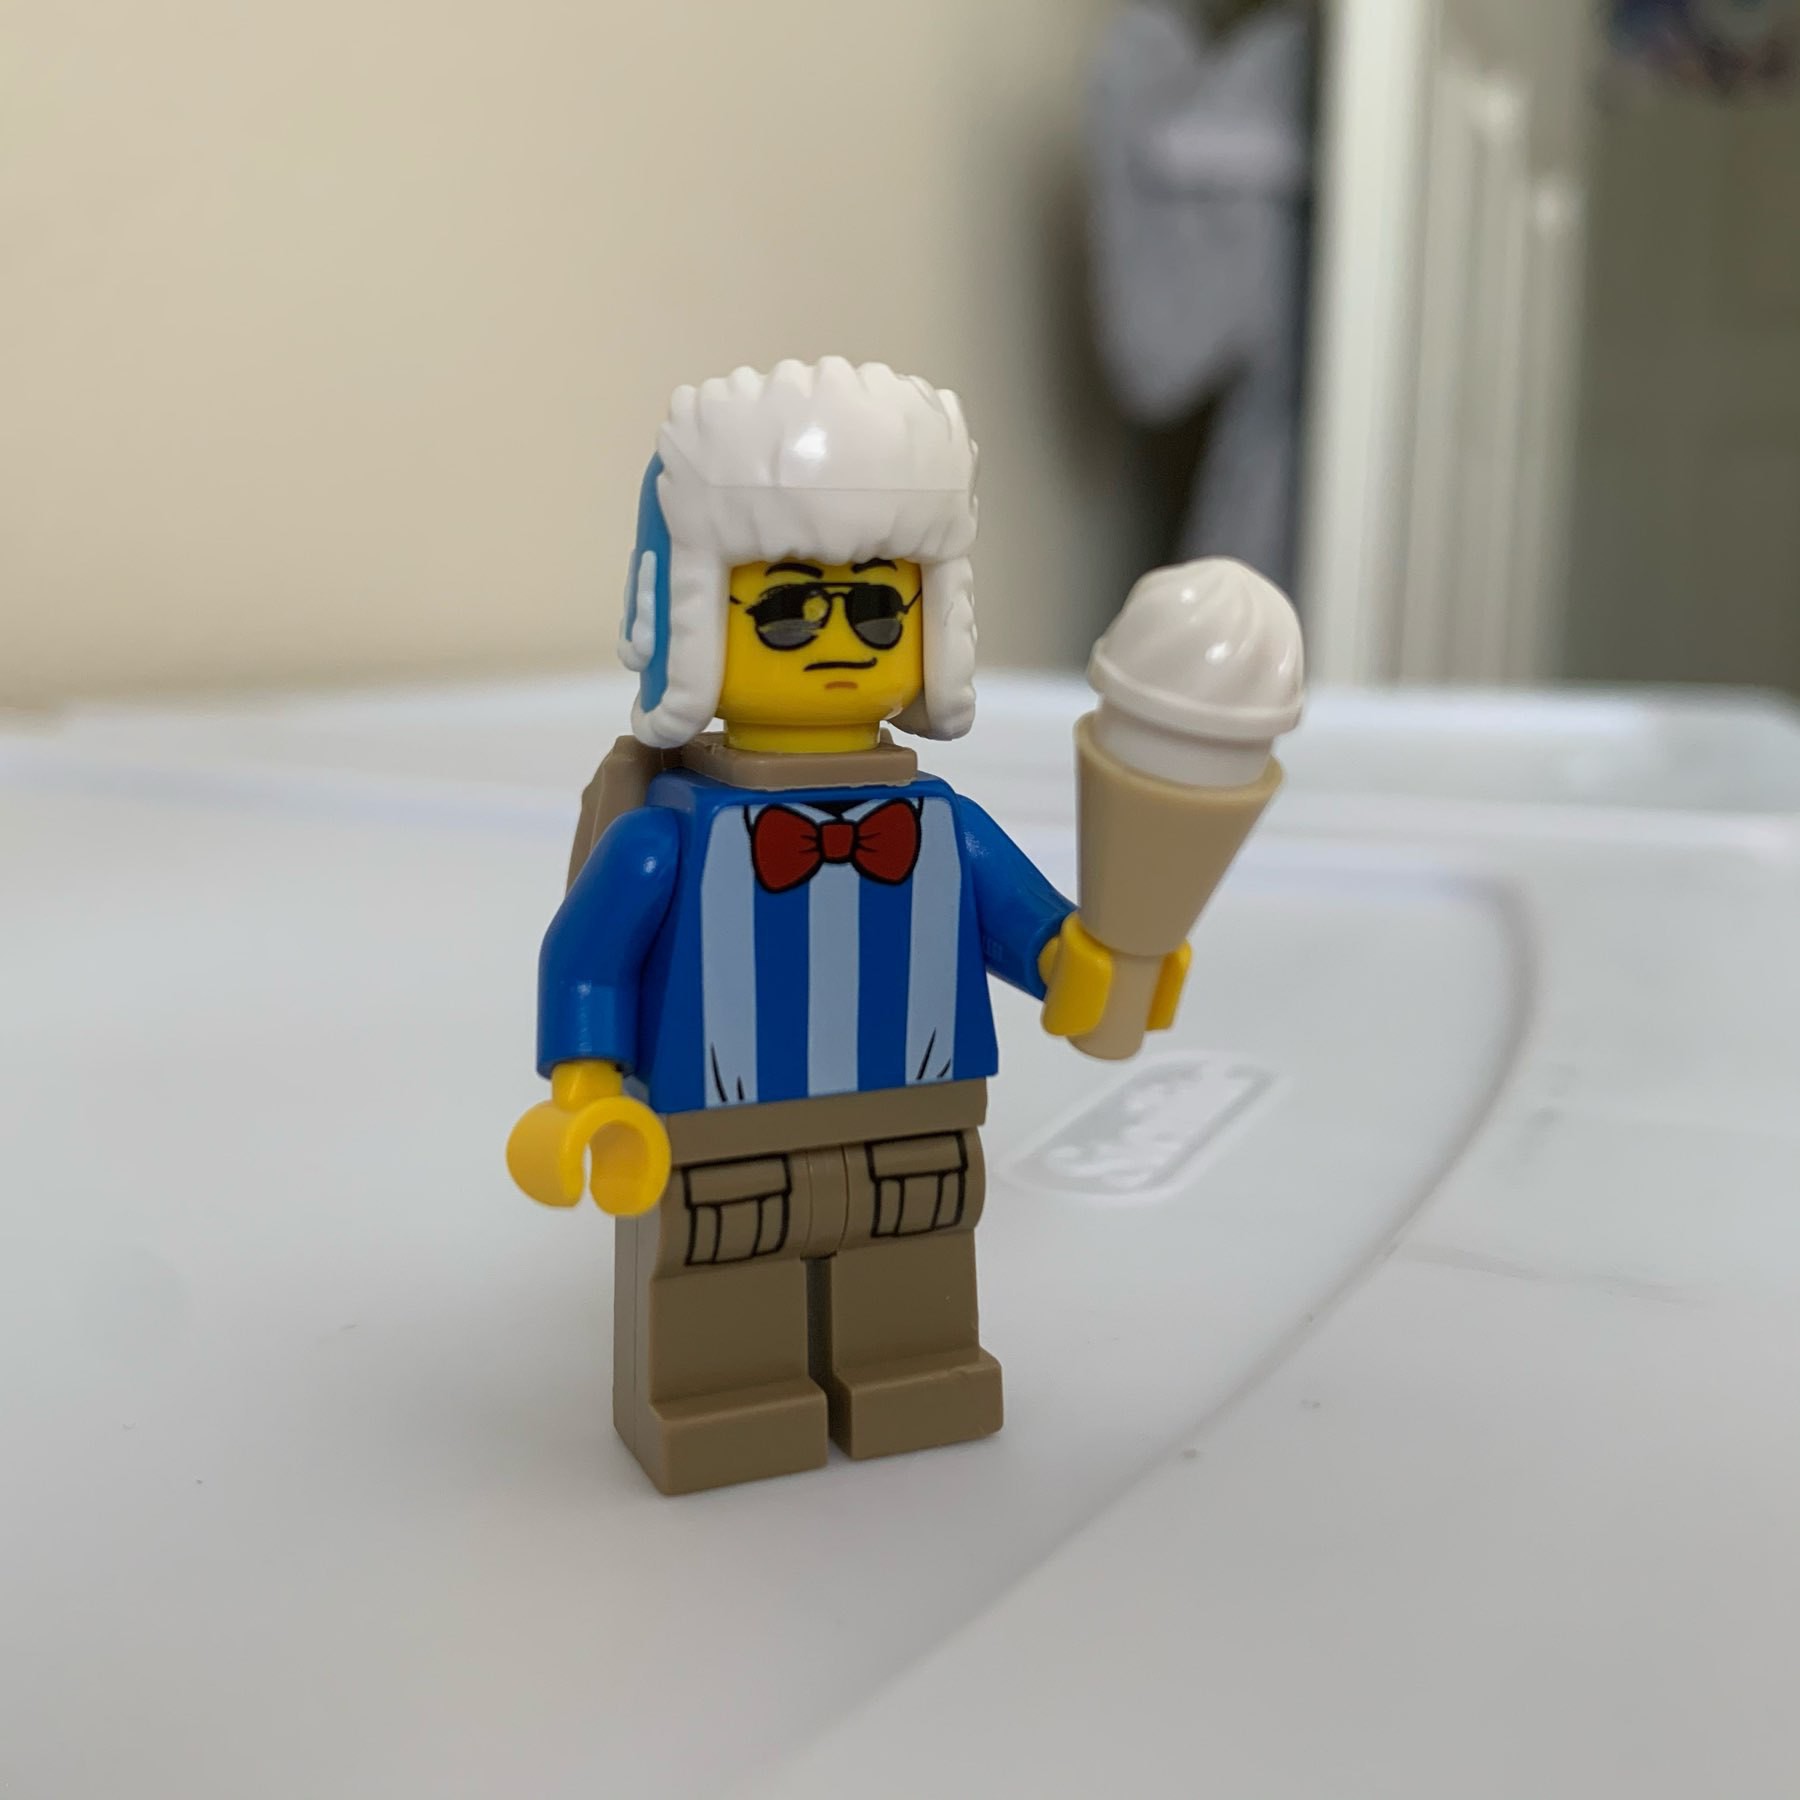 LEGO minifigure wearing blue shirt, red bowtie, sunglasses, backpack, winter hat, and holding an ice cream cone.